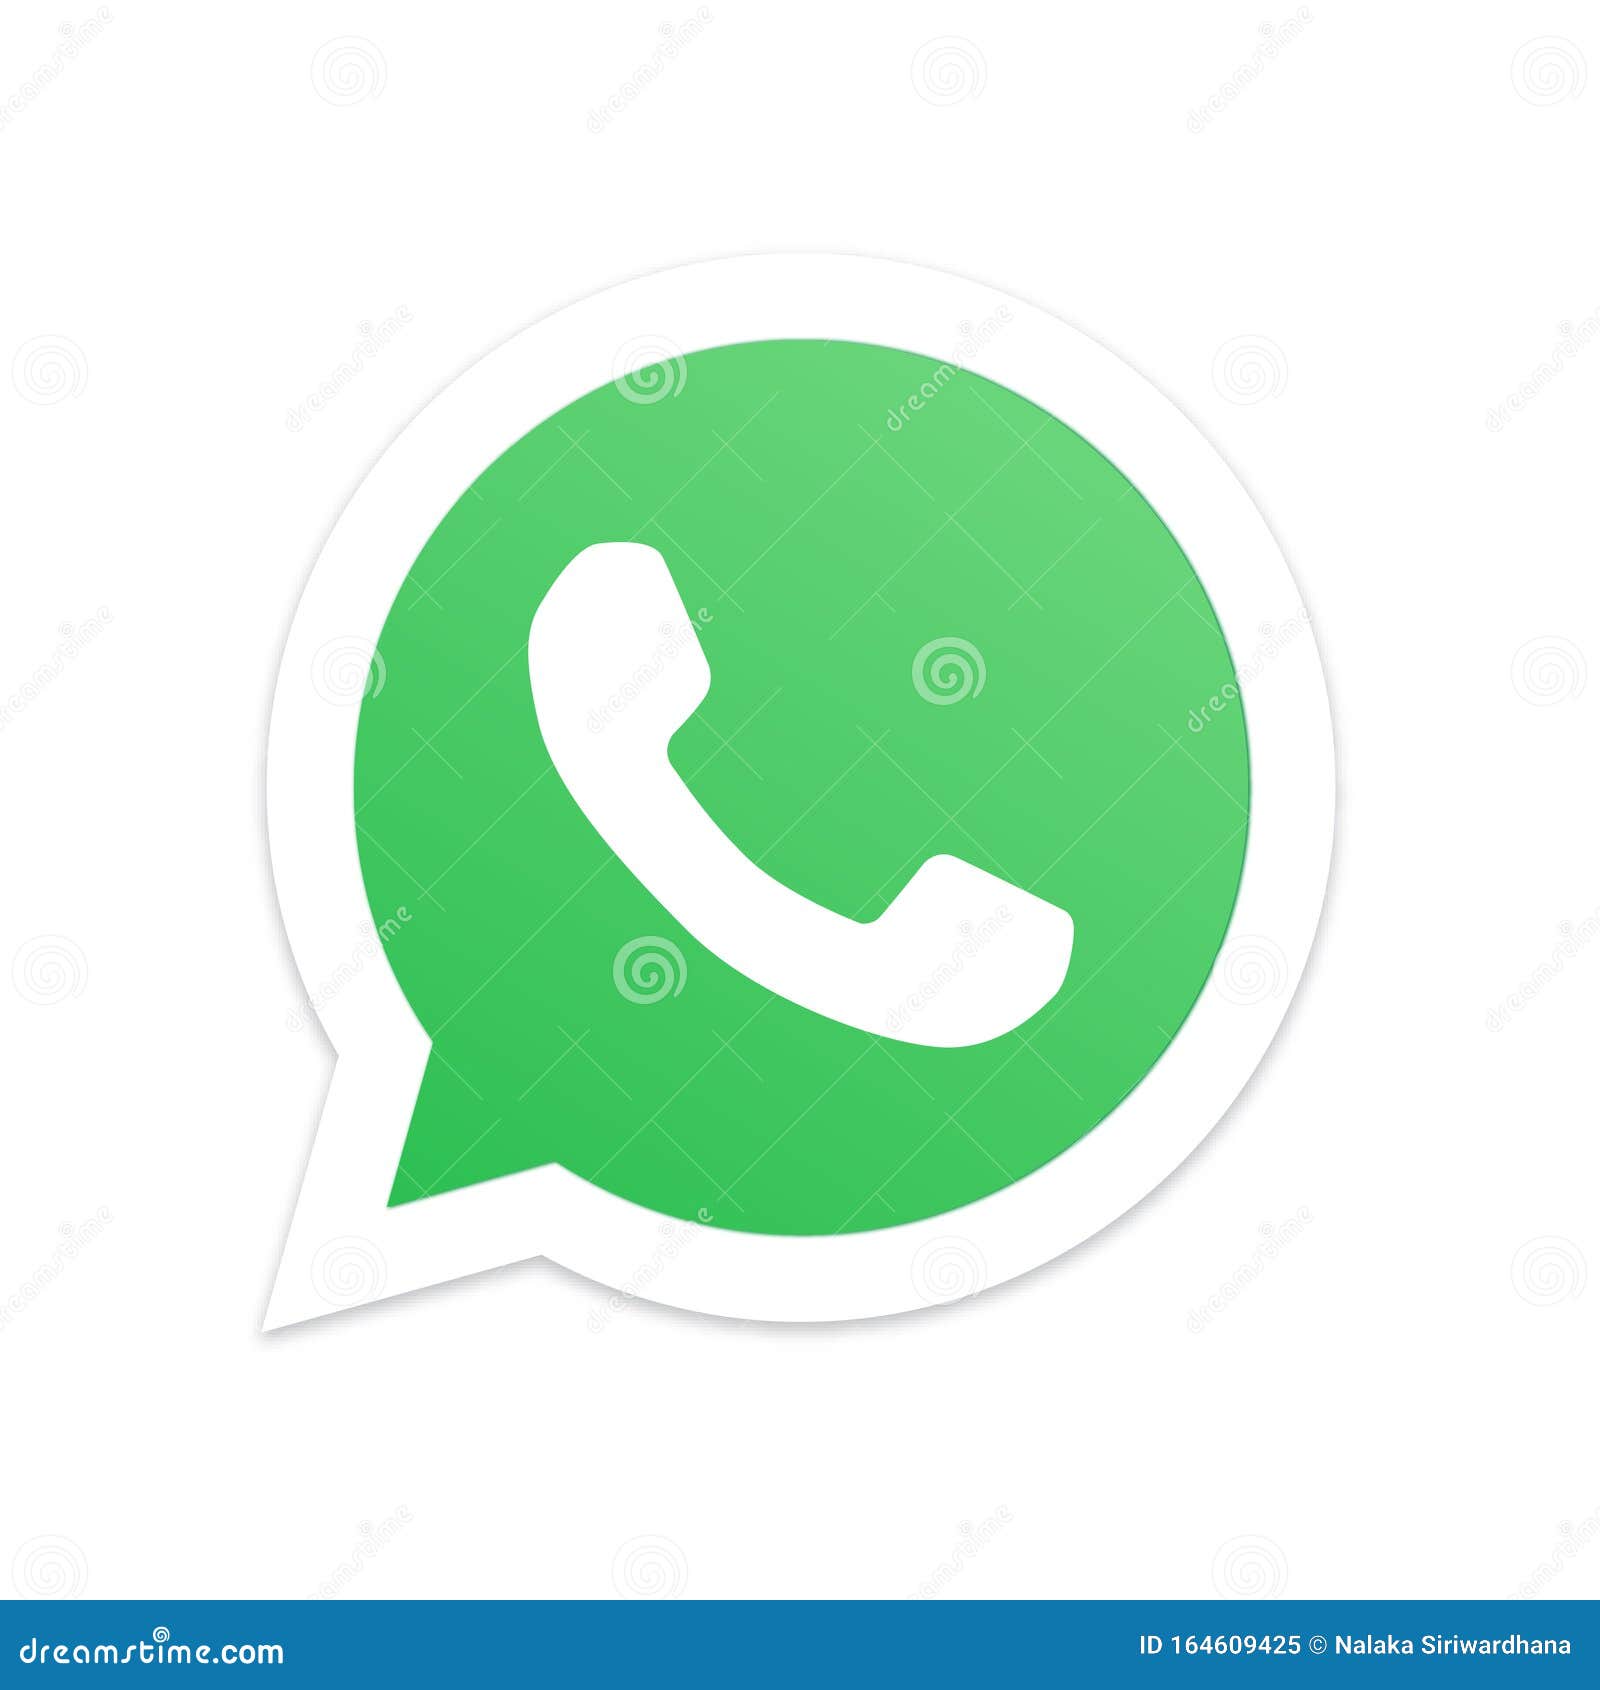 Whatsapp Flat Icon Editorial Image Illustration Of Dial 164609425